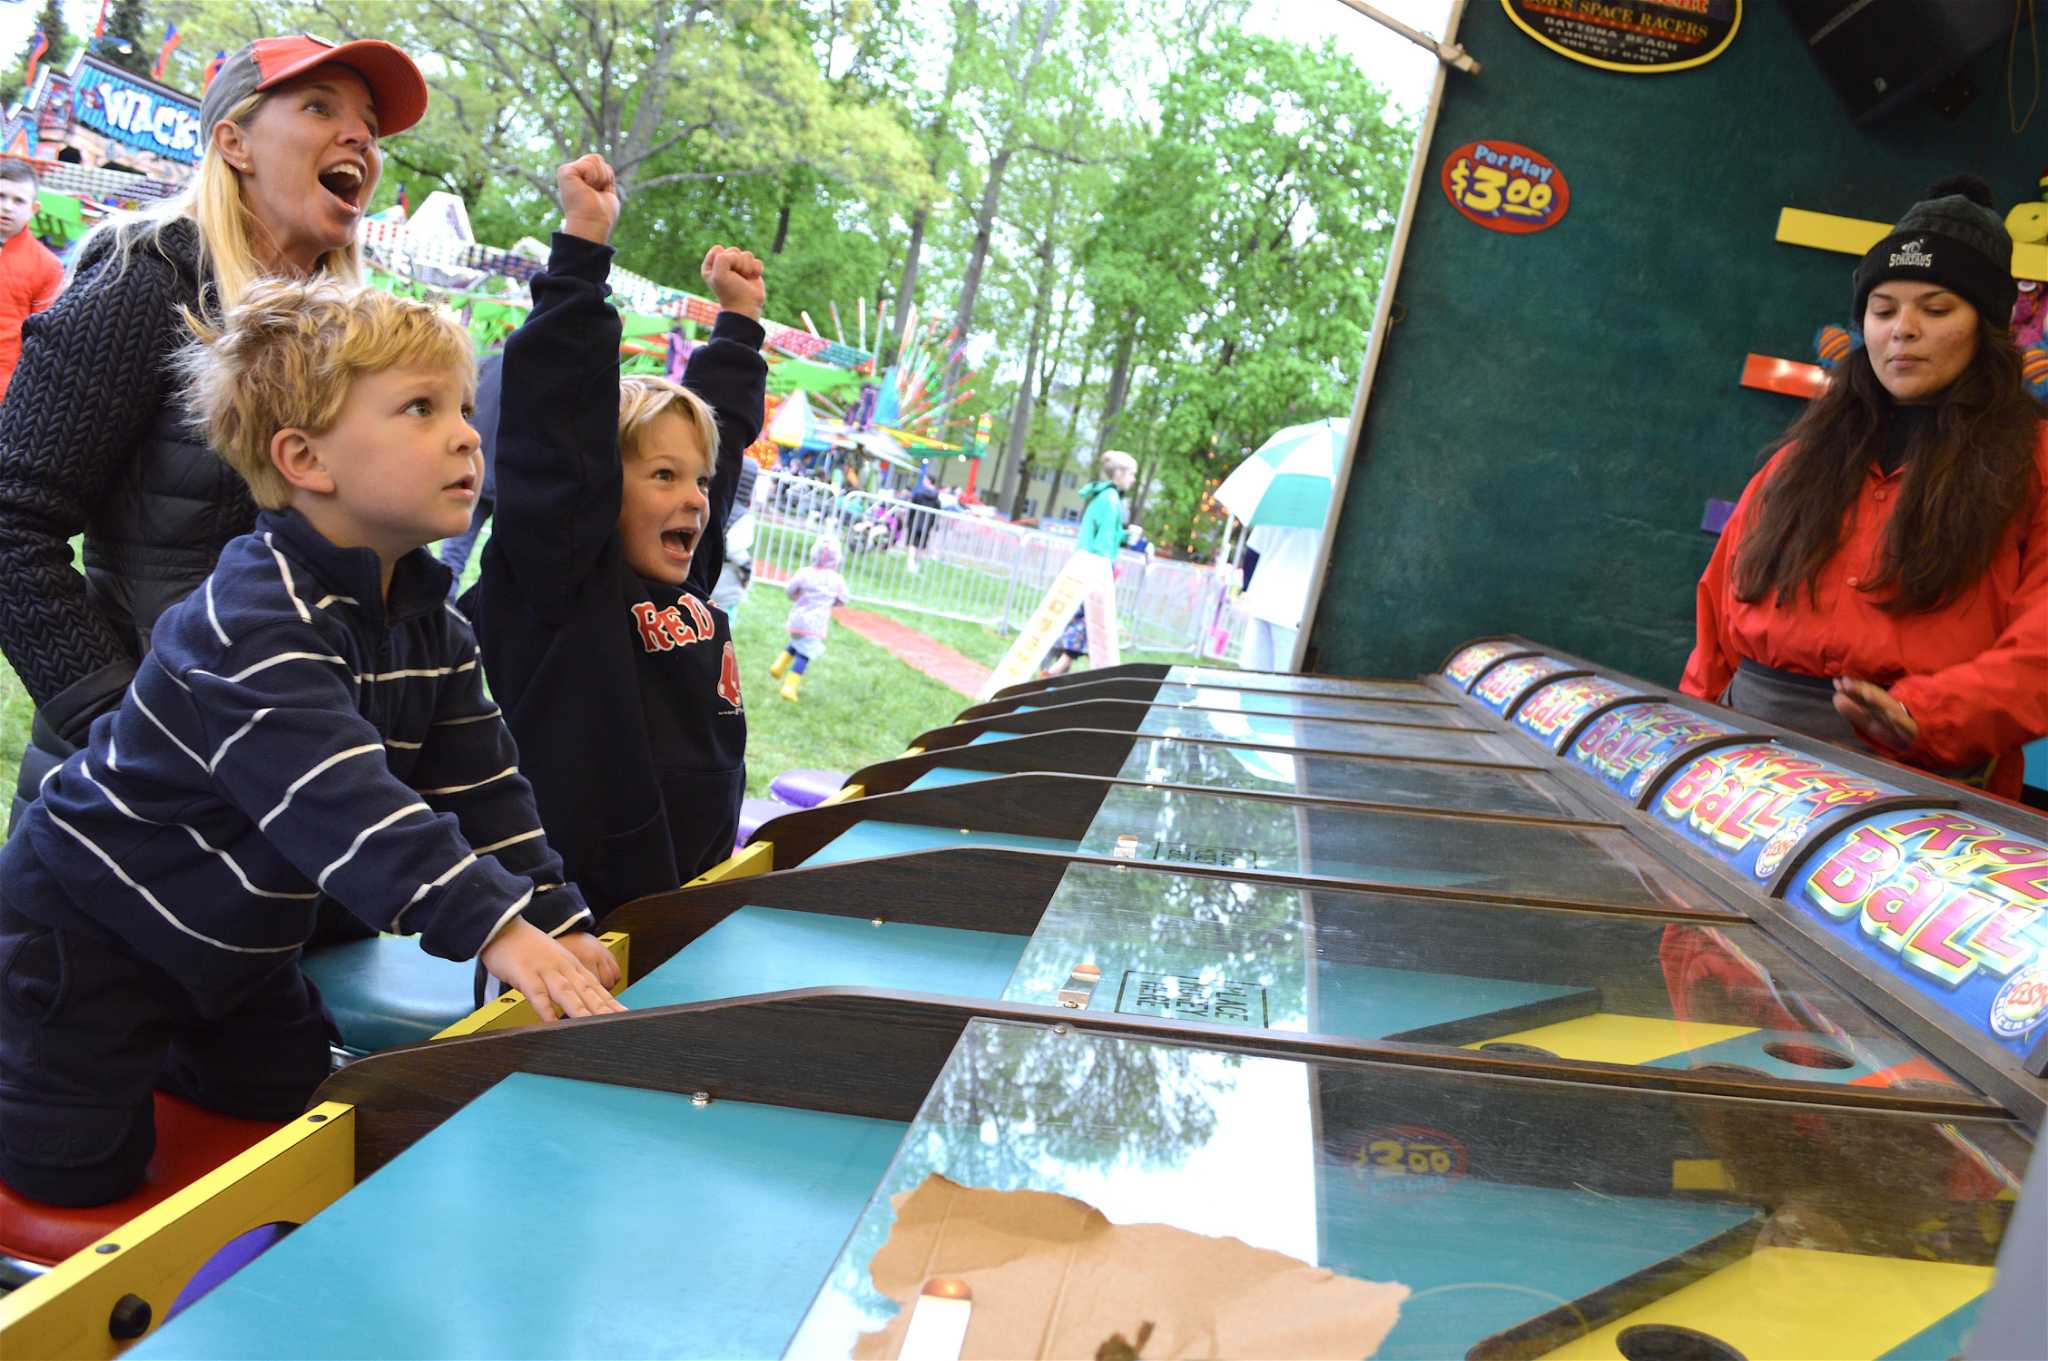 St. Mark’s May Fair returns to New Canaan after twoyear hiatus